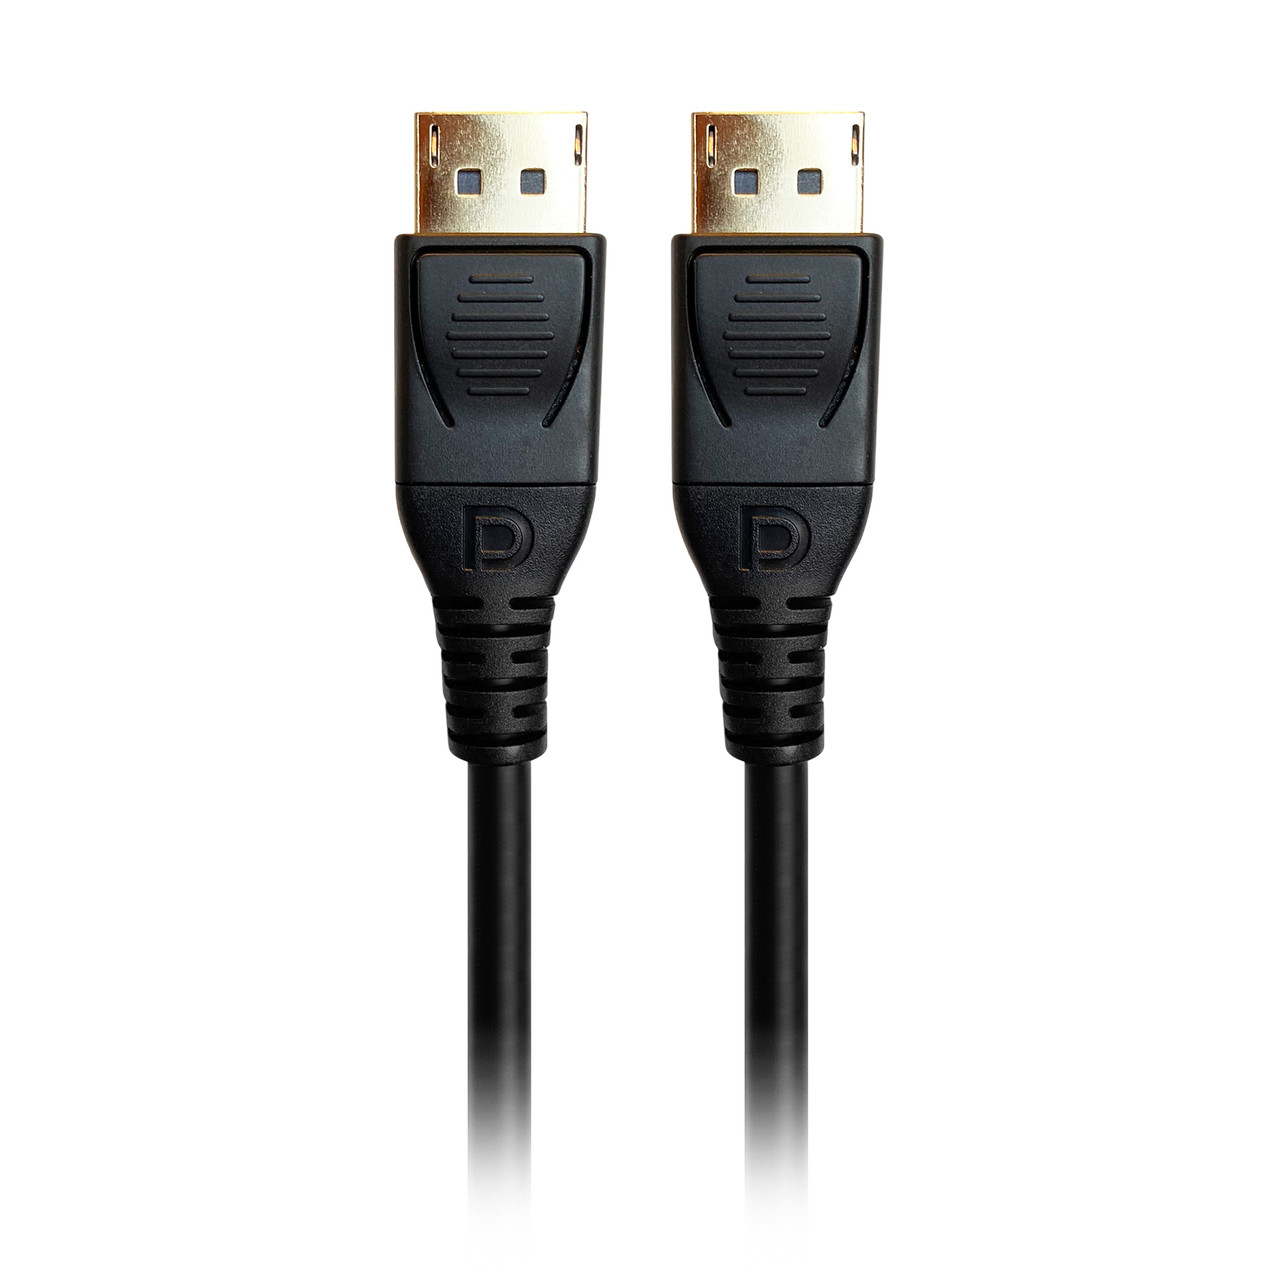 Displayport cable - A wide range of products at